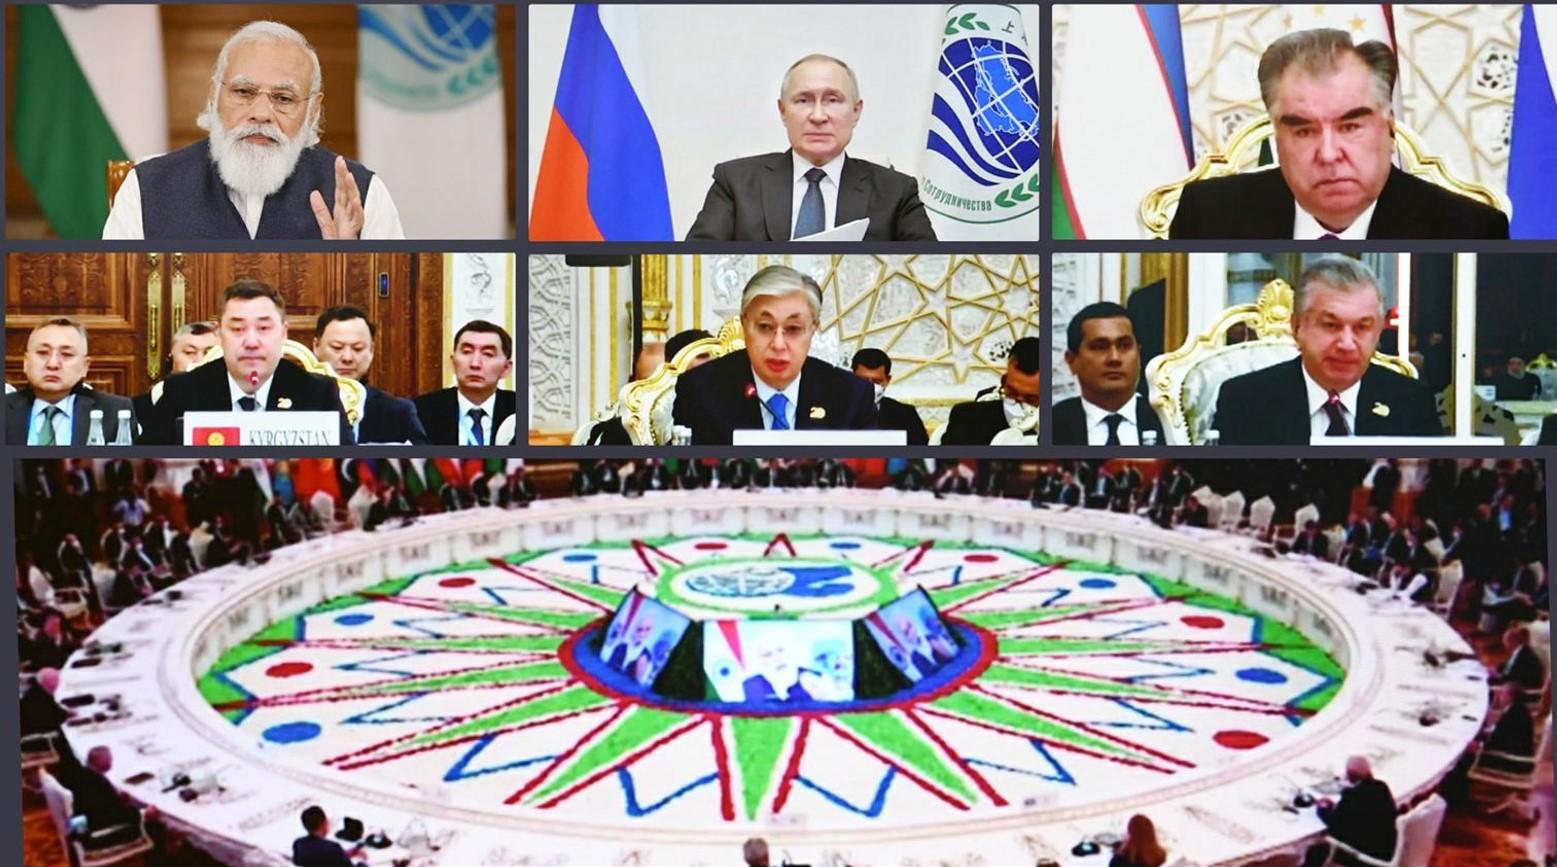 Prime Minister Modi virtually participates in 21st Meeting of the Council of Heads of State of the Shanghai Cooperation Organisation - Chanakya Forum